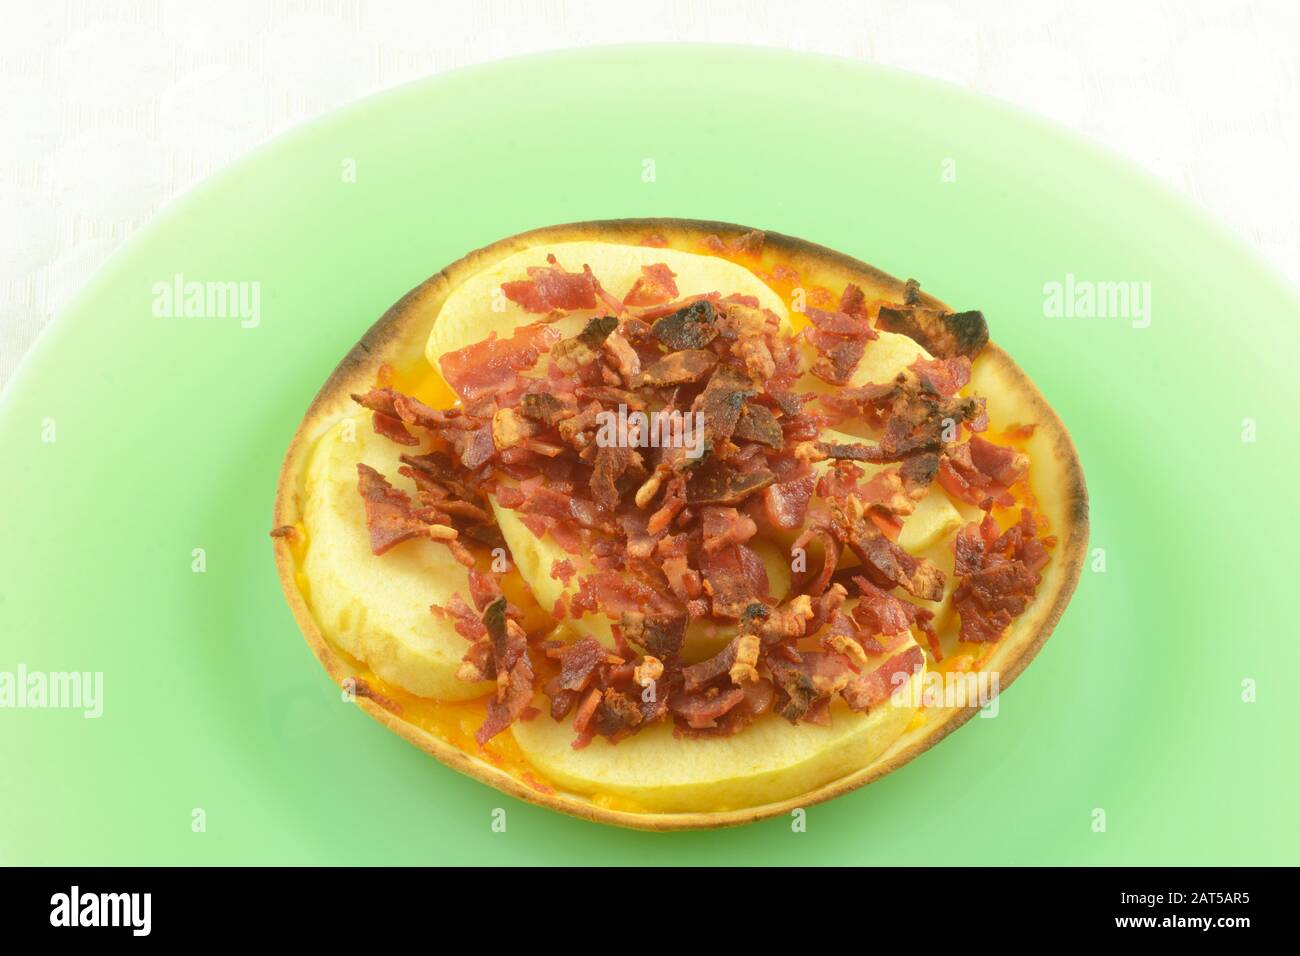 https://c8.alamy.com/comp/2AT5AR5/healthy-snack-of-melted-cheese-apple-slices-and-turkey-bacon-bits-on-tortilla-on-green-plate-with-white-tablecloth-background-2AT5AR5.jpg